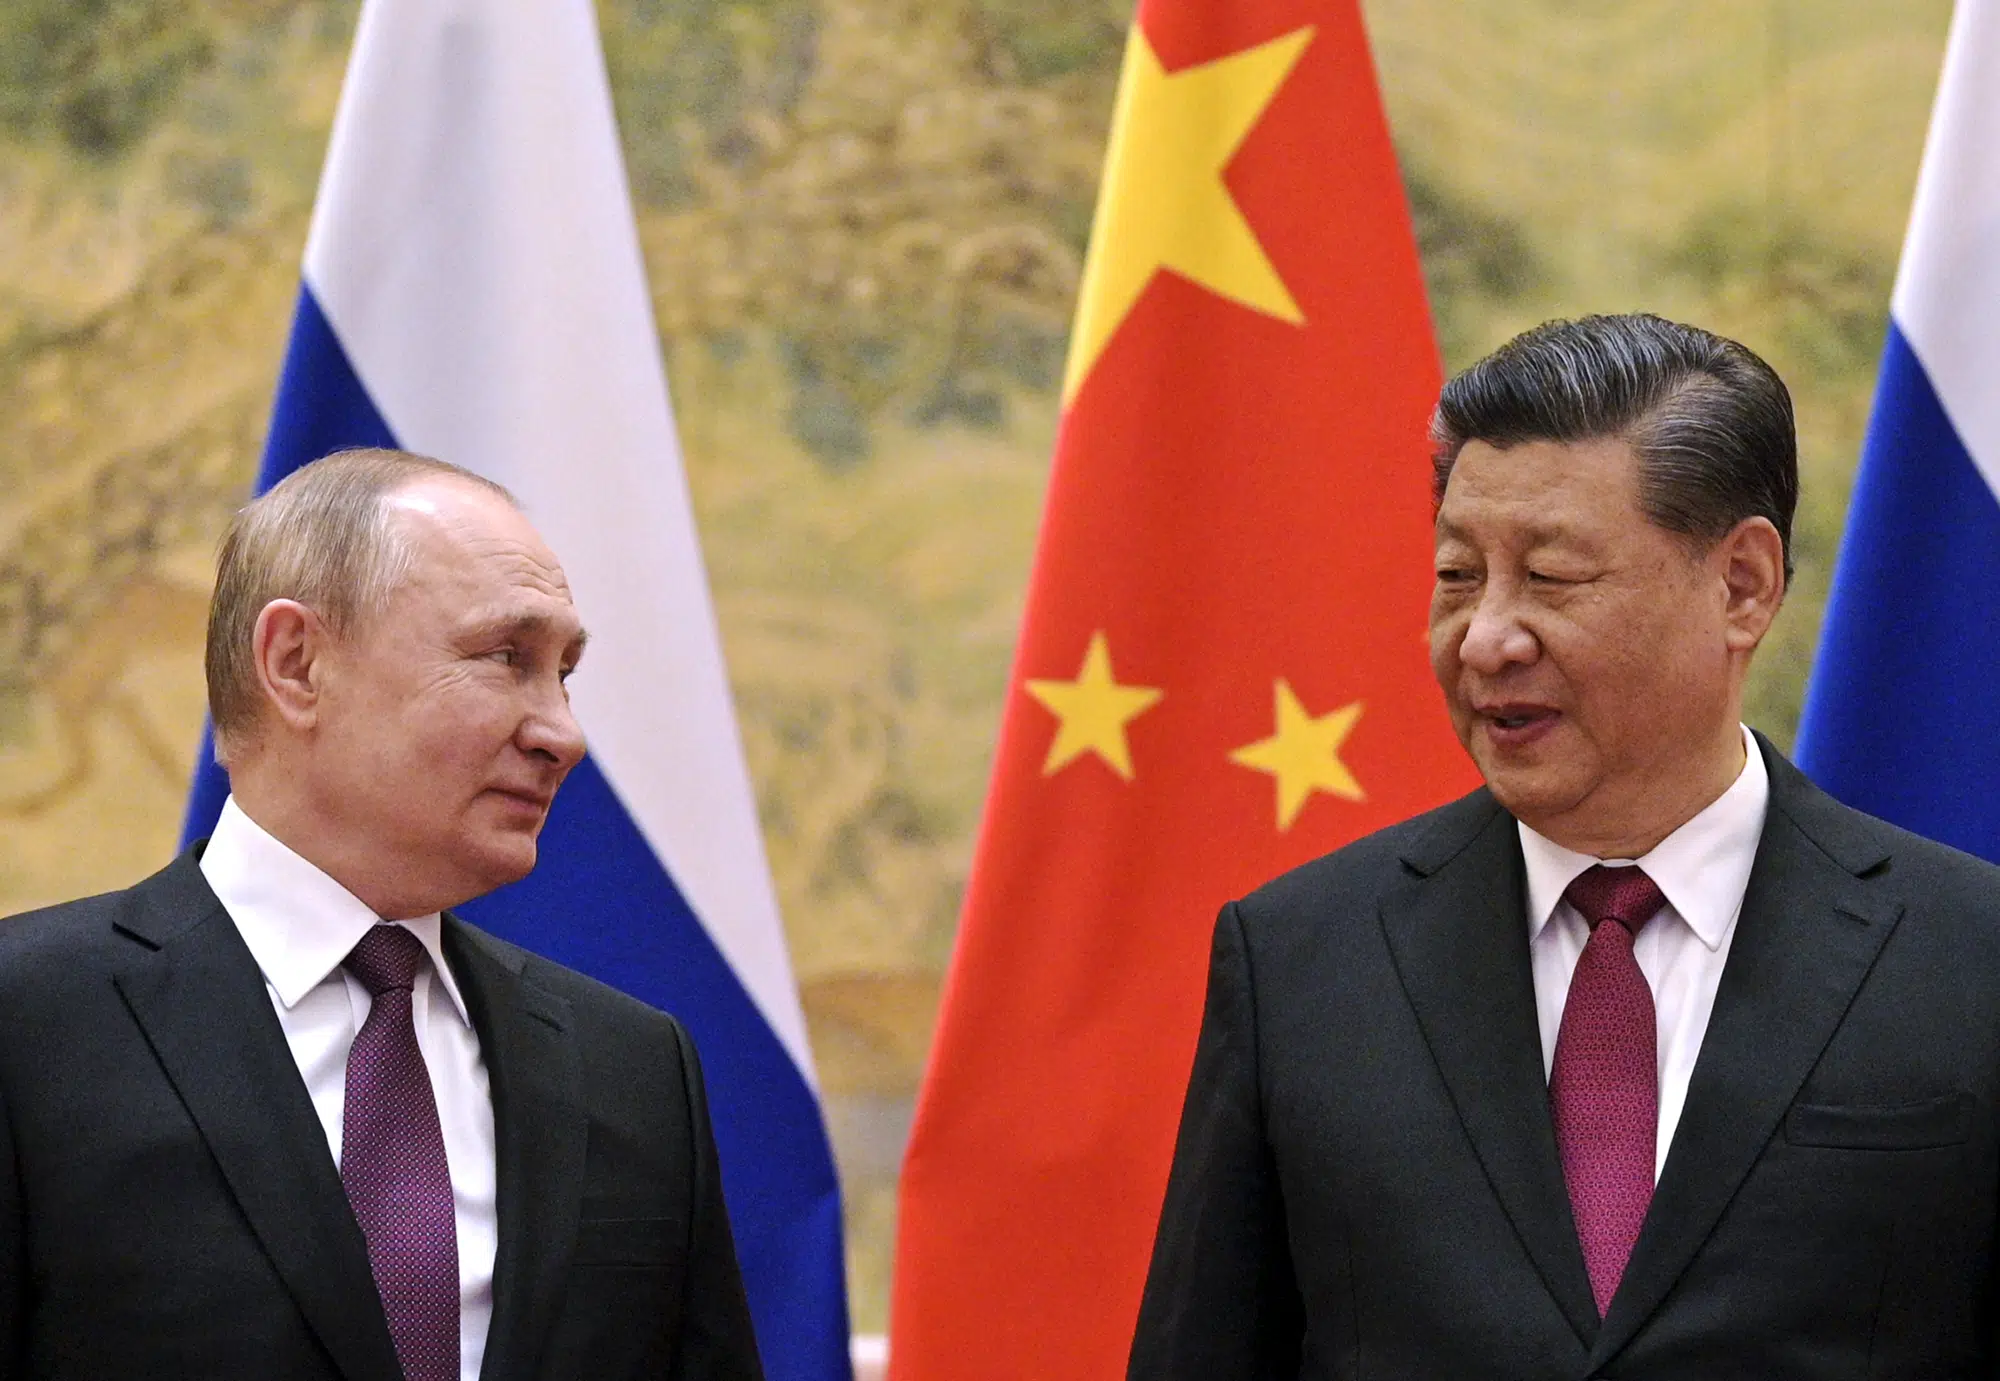 Why China's stand on Russia and Ukraine is raising concerns | AP News